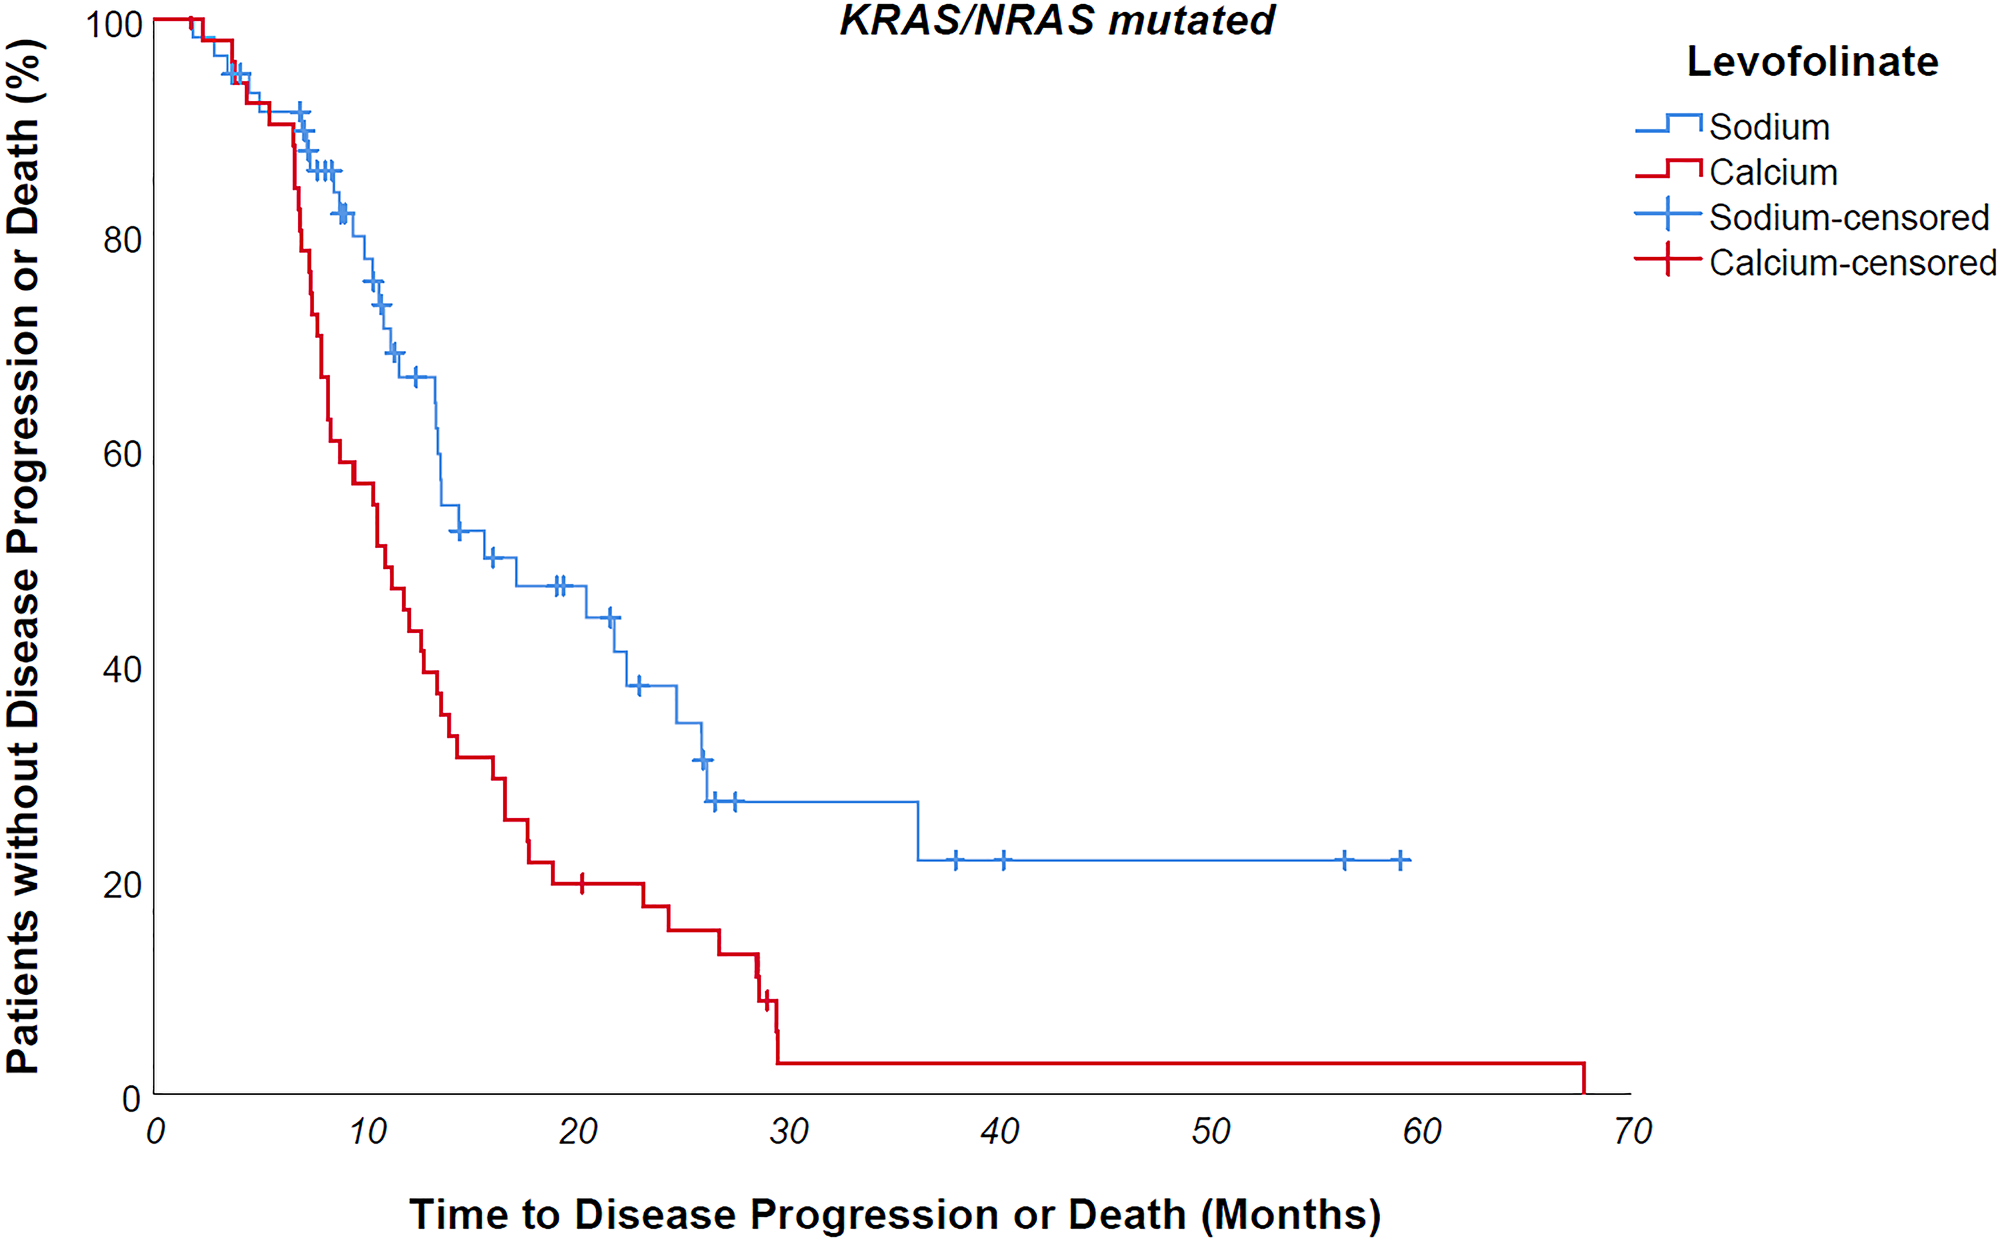 KRAS/NRAS mutated NaLF treated patients progressed 4.7 months later than CaLF treated patients (median PFS 15.7 vs 11 months, p value 0,003).